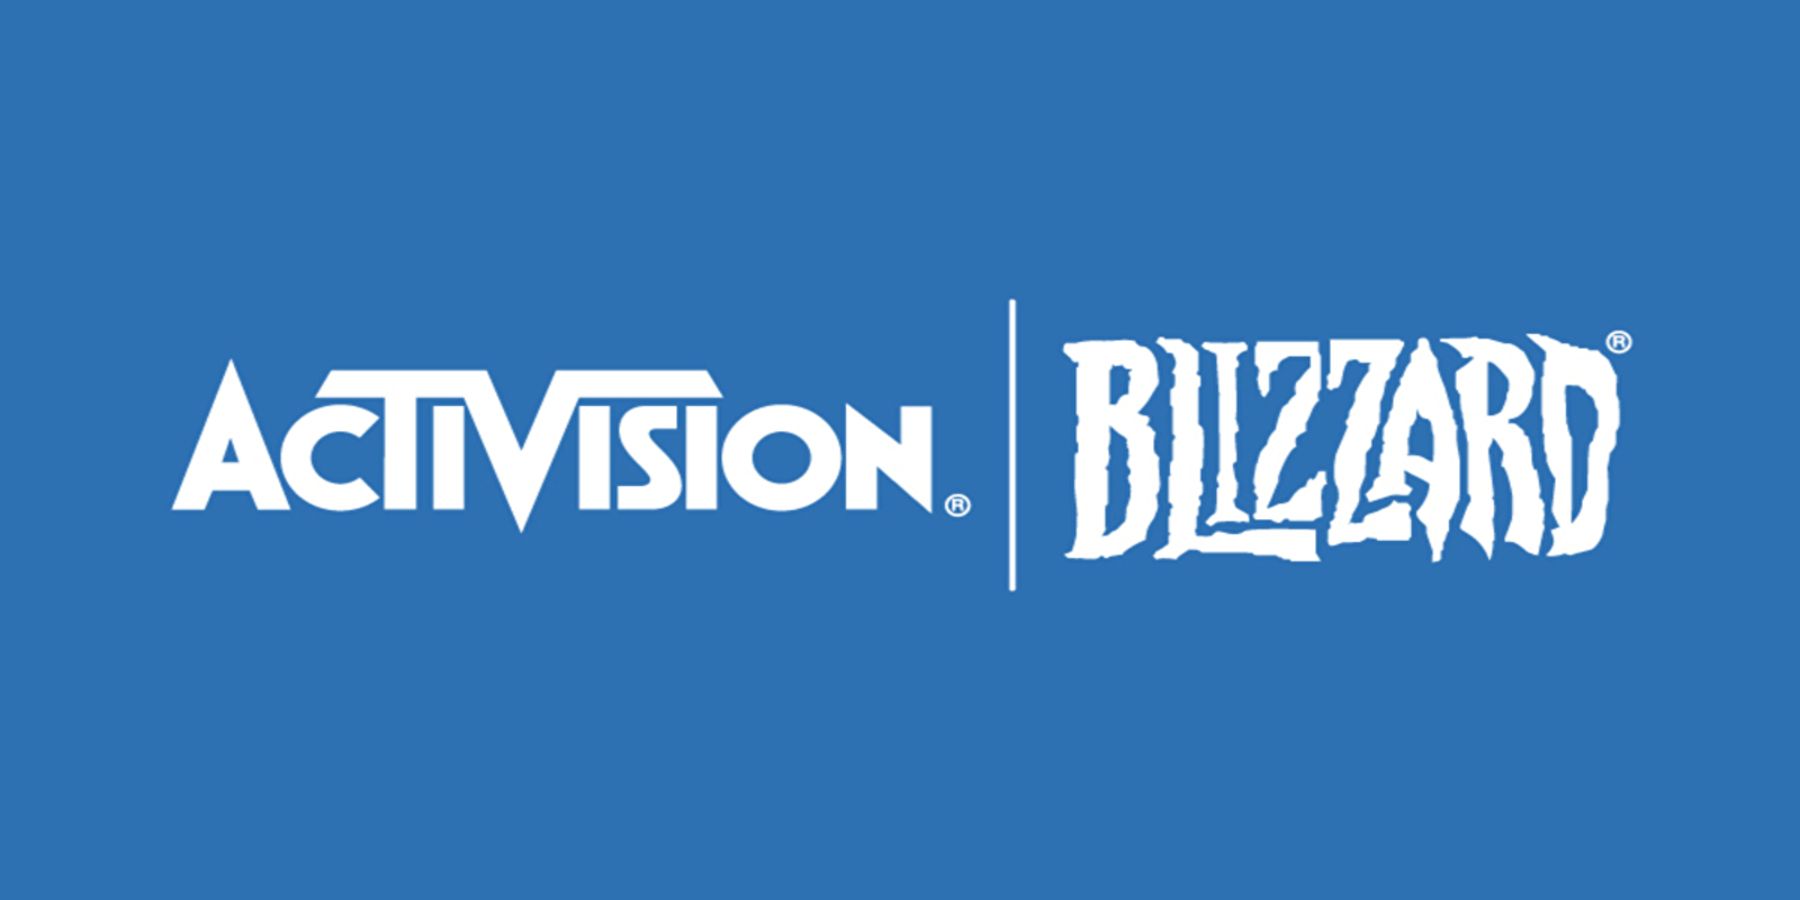 activision-blizzard-suspends-new-sales-of-and-in-it-games-in-russia-1646504335638_1800x900-1